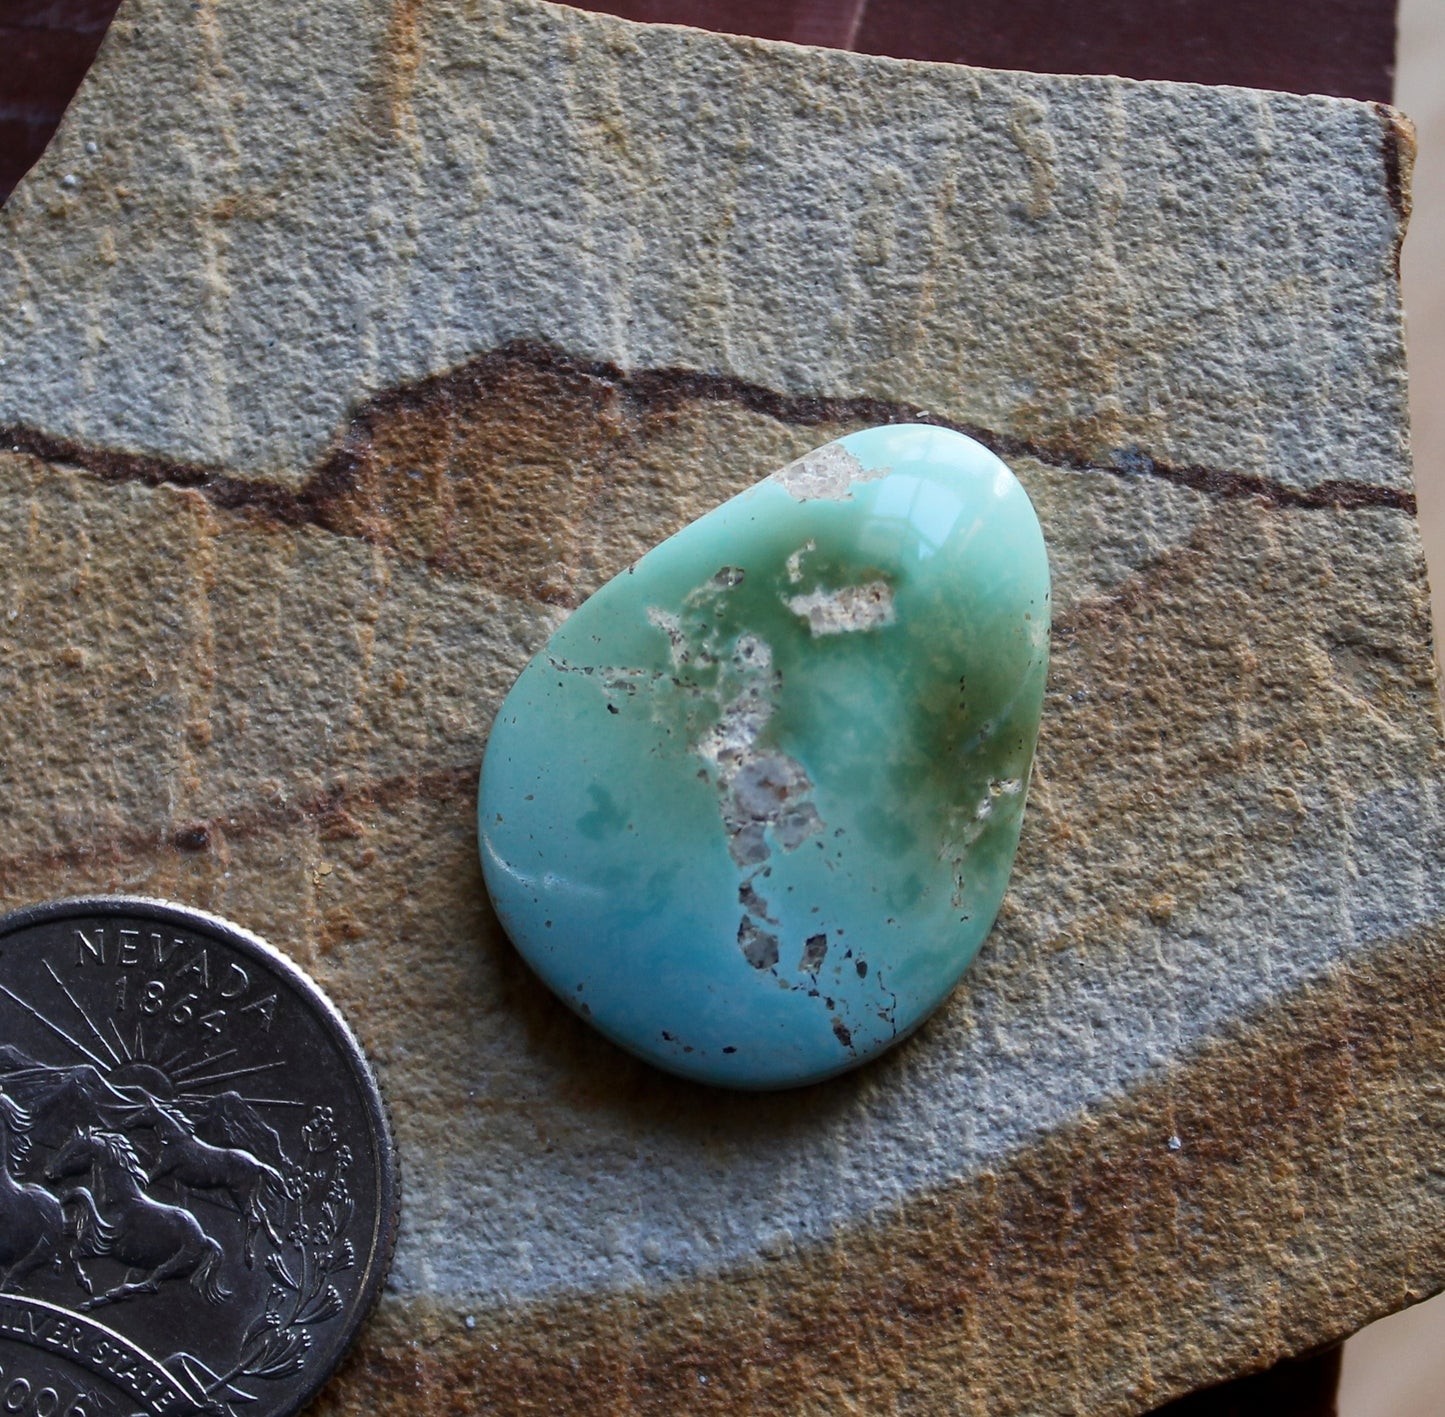 22 carat color change Stone Mountain Turquoise cabochon with a high dome